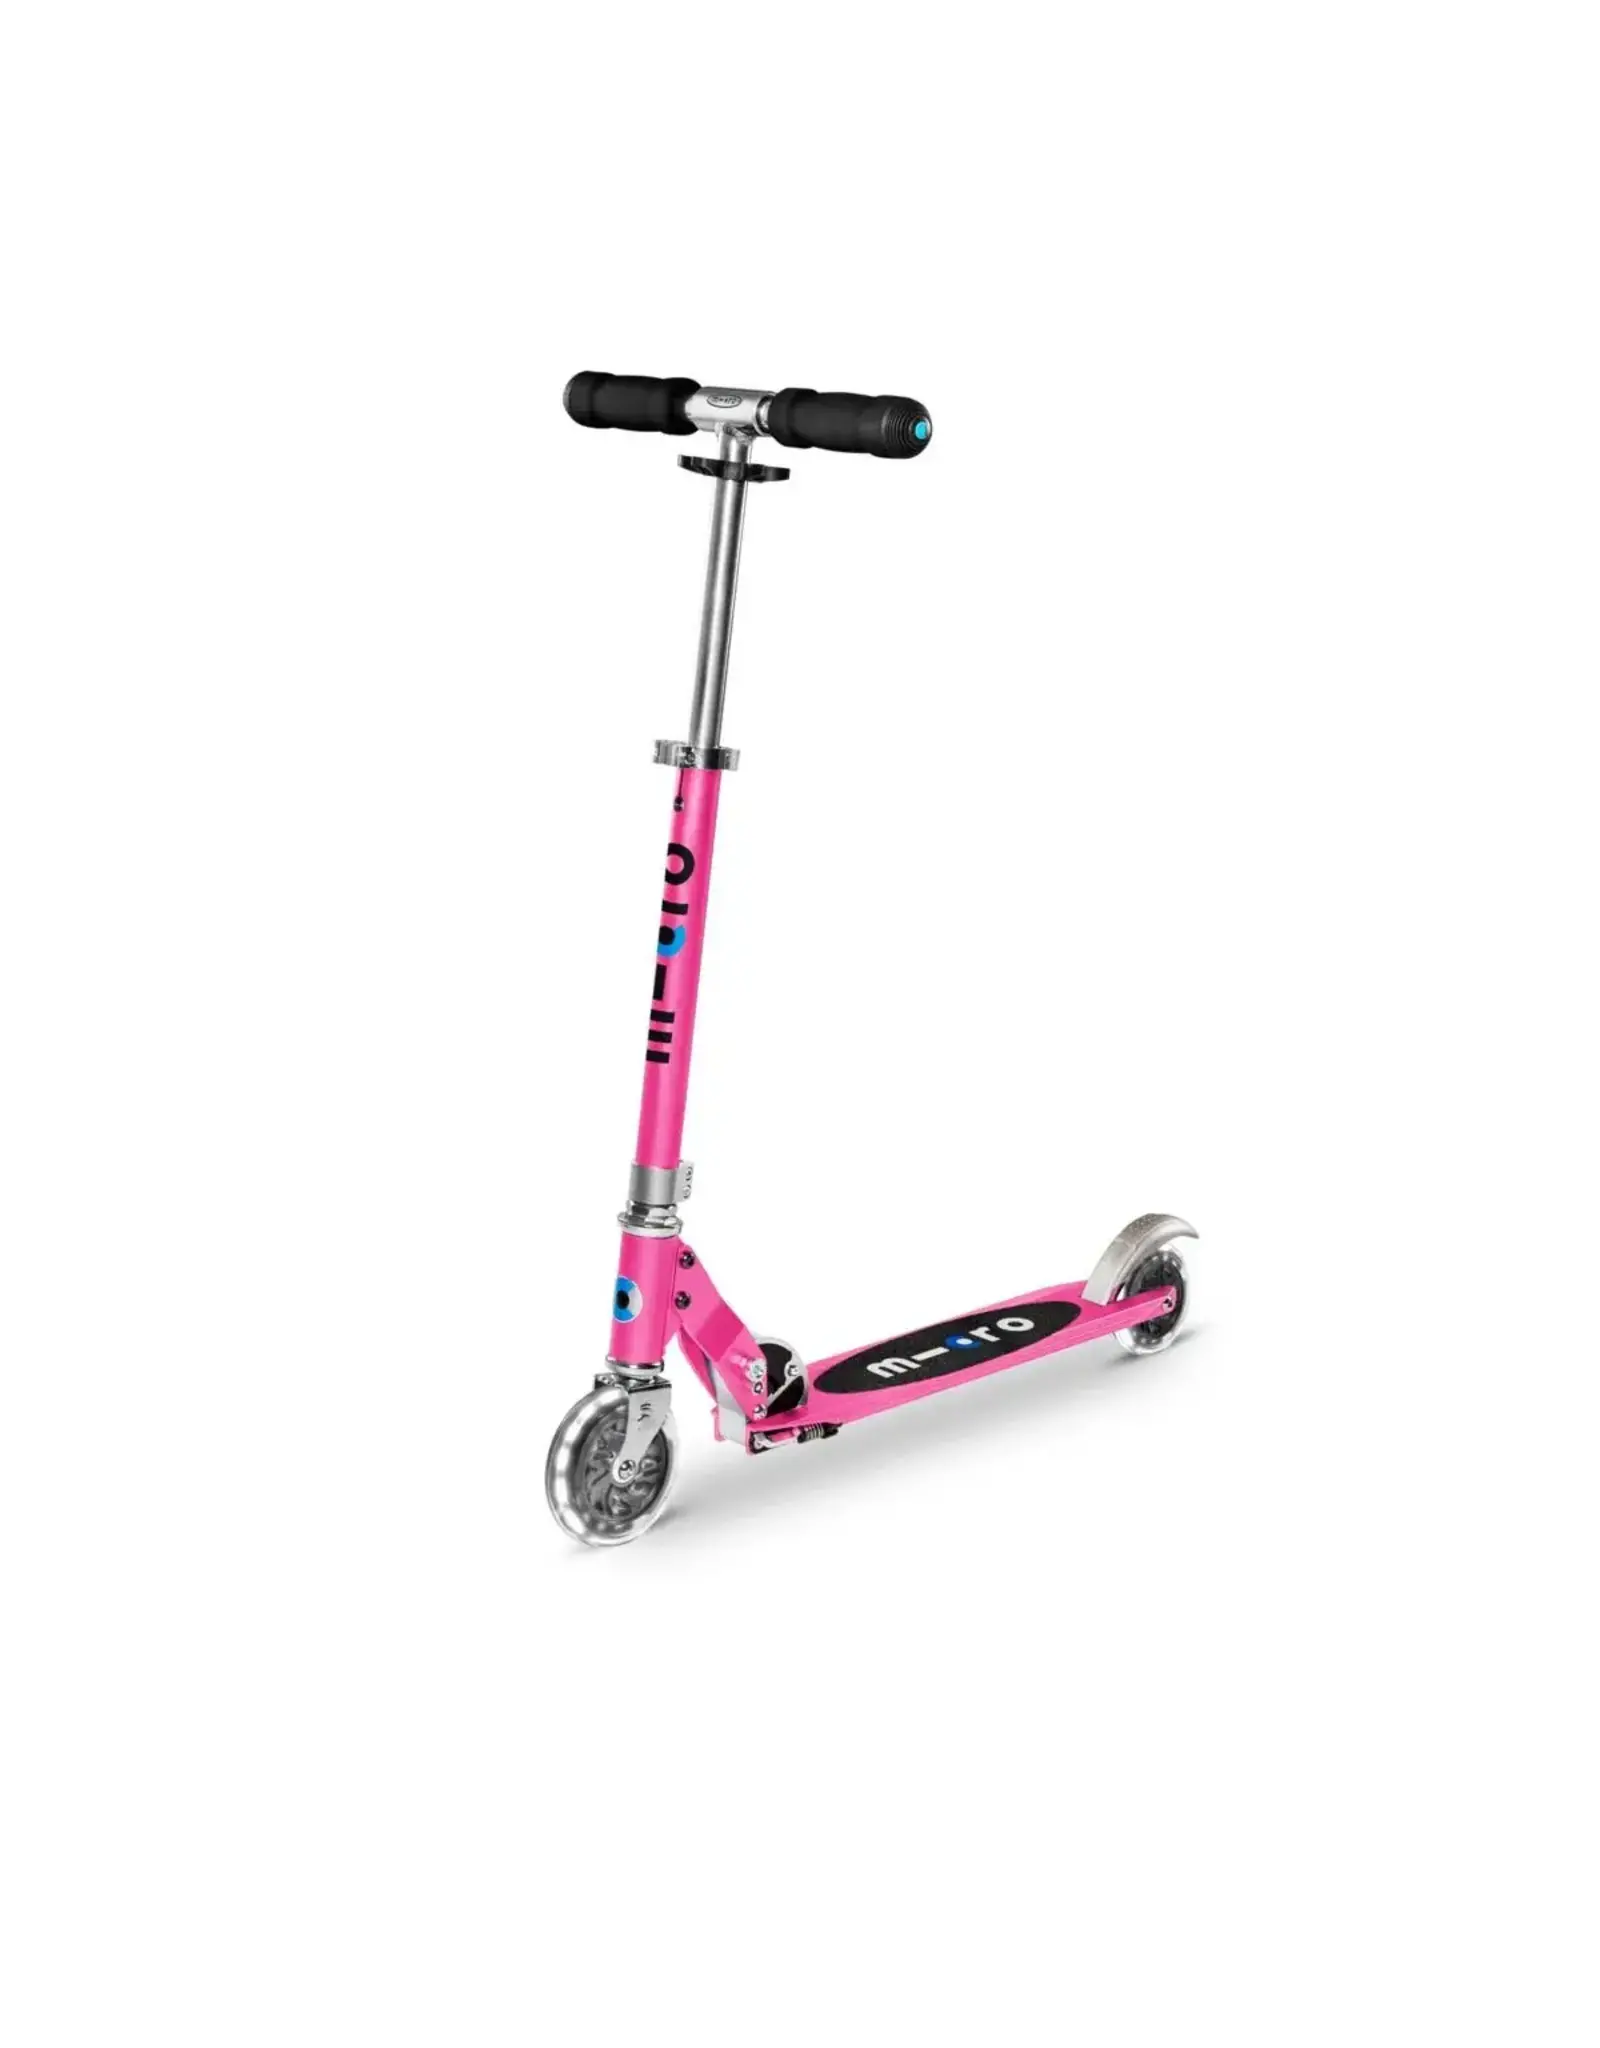 Micro Micro Sprite LED Scooter - Pink